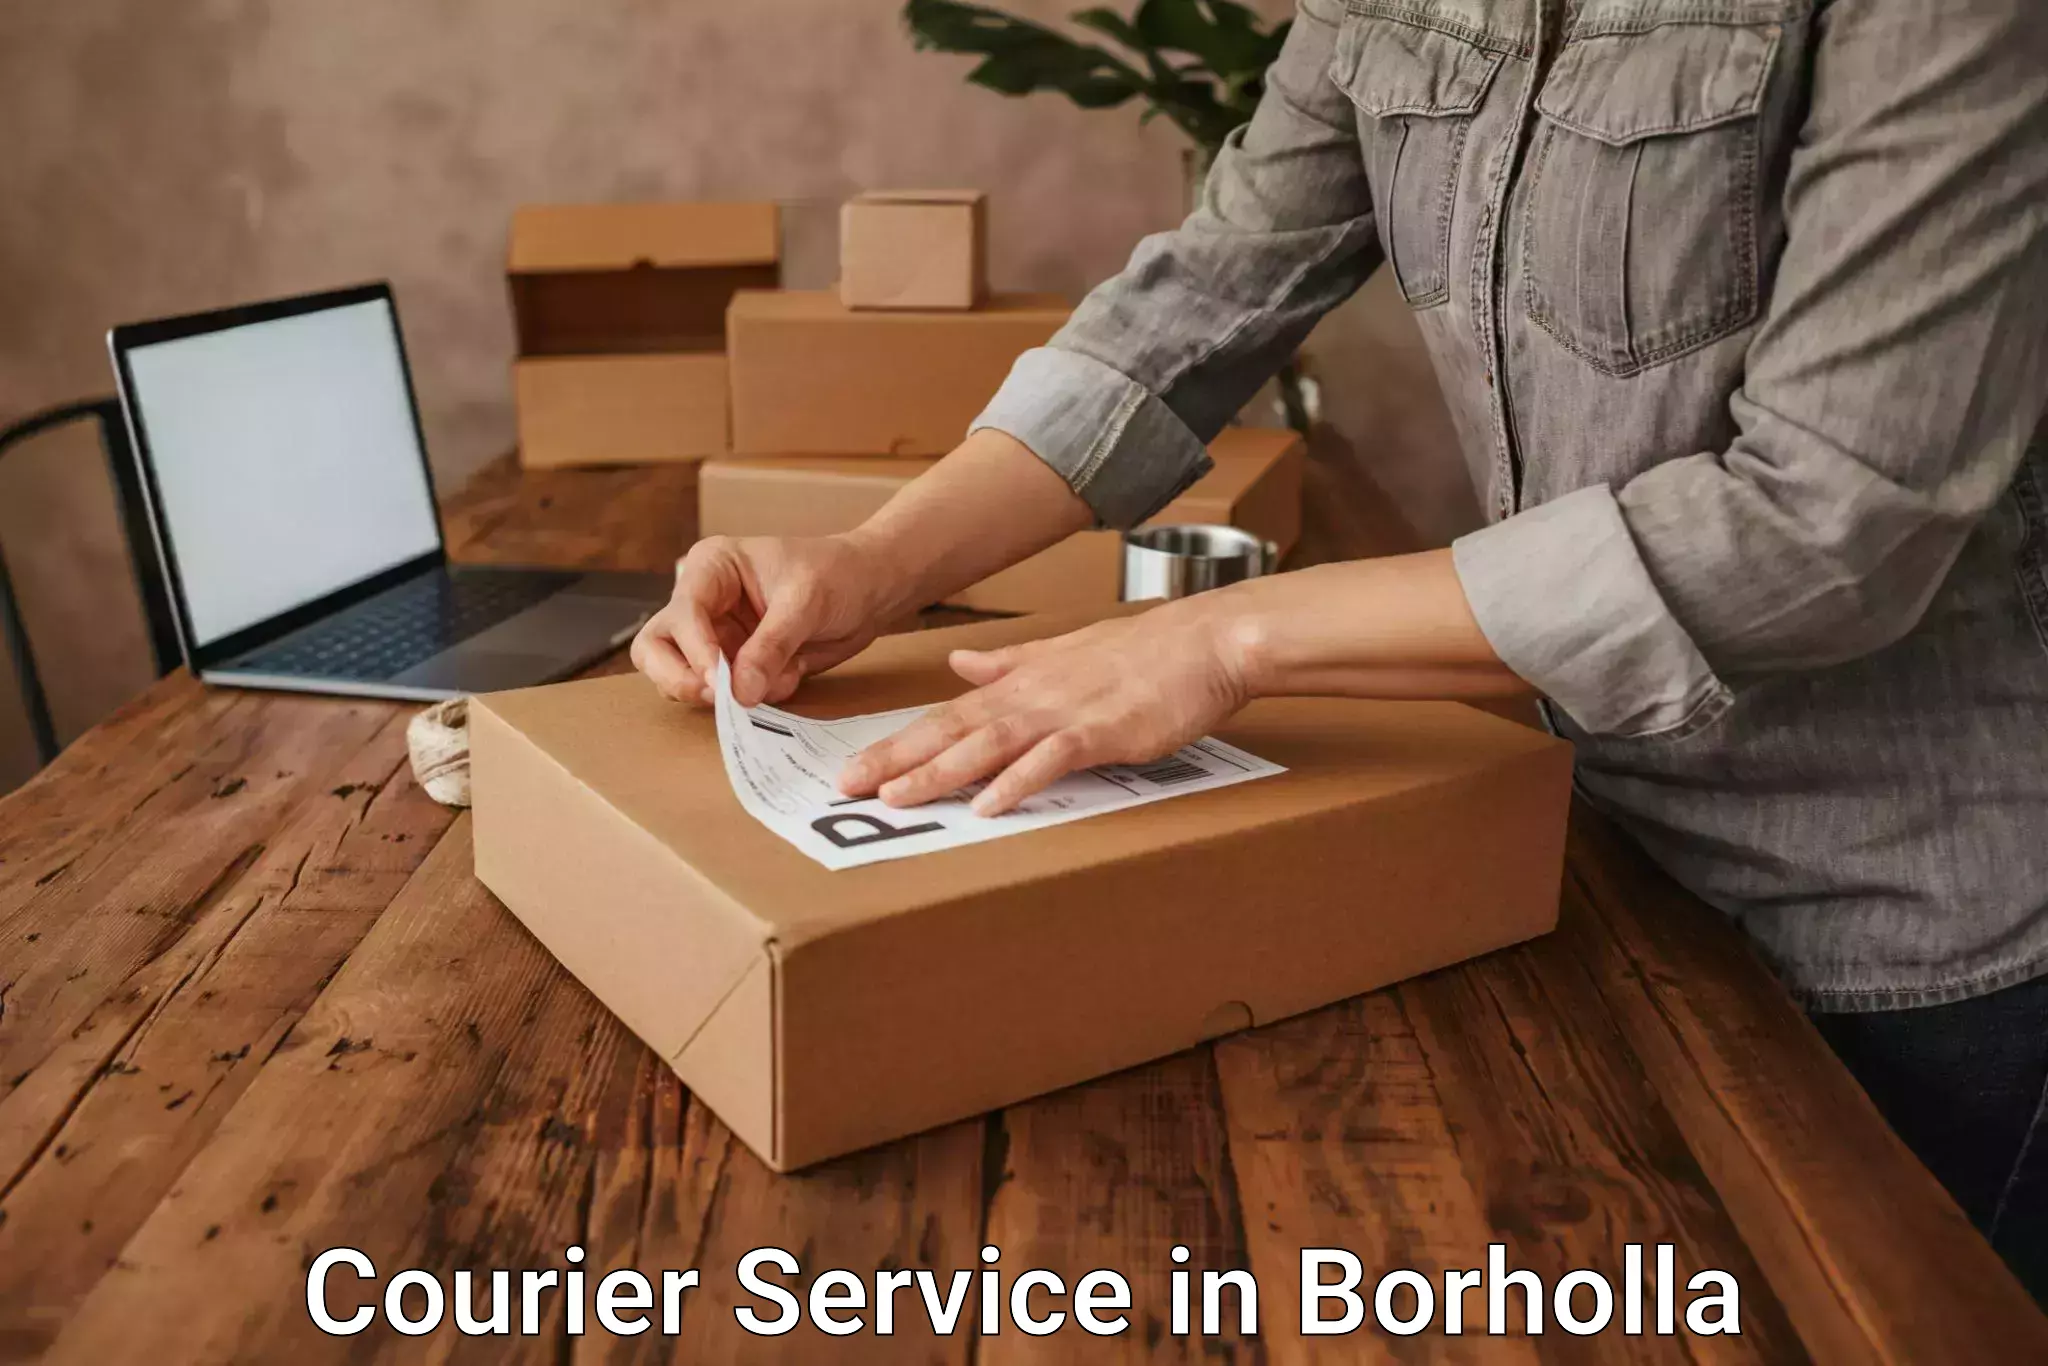 Trackable shipping service in Borholla